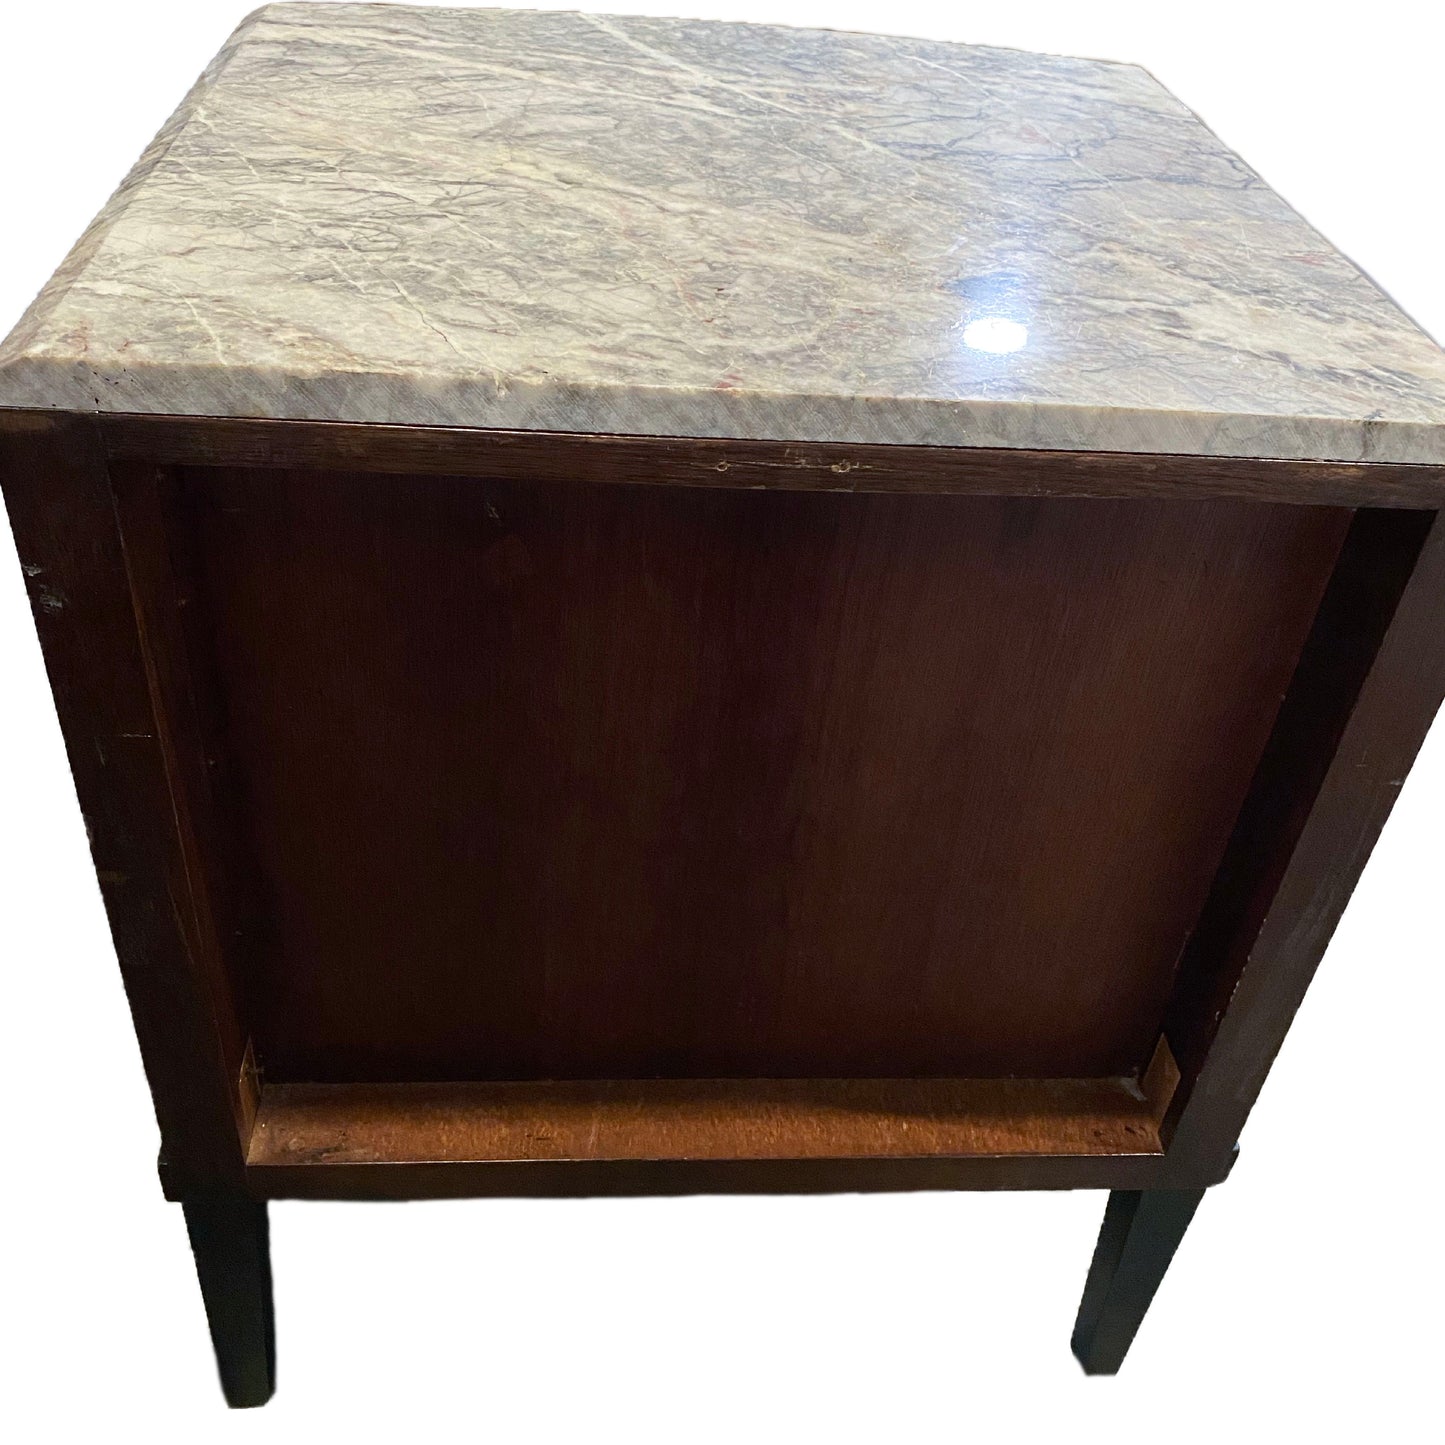 Refinished Vintage Marble Top 2 Drawer End Table